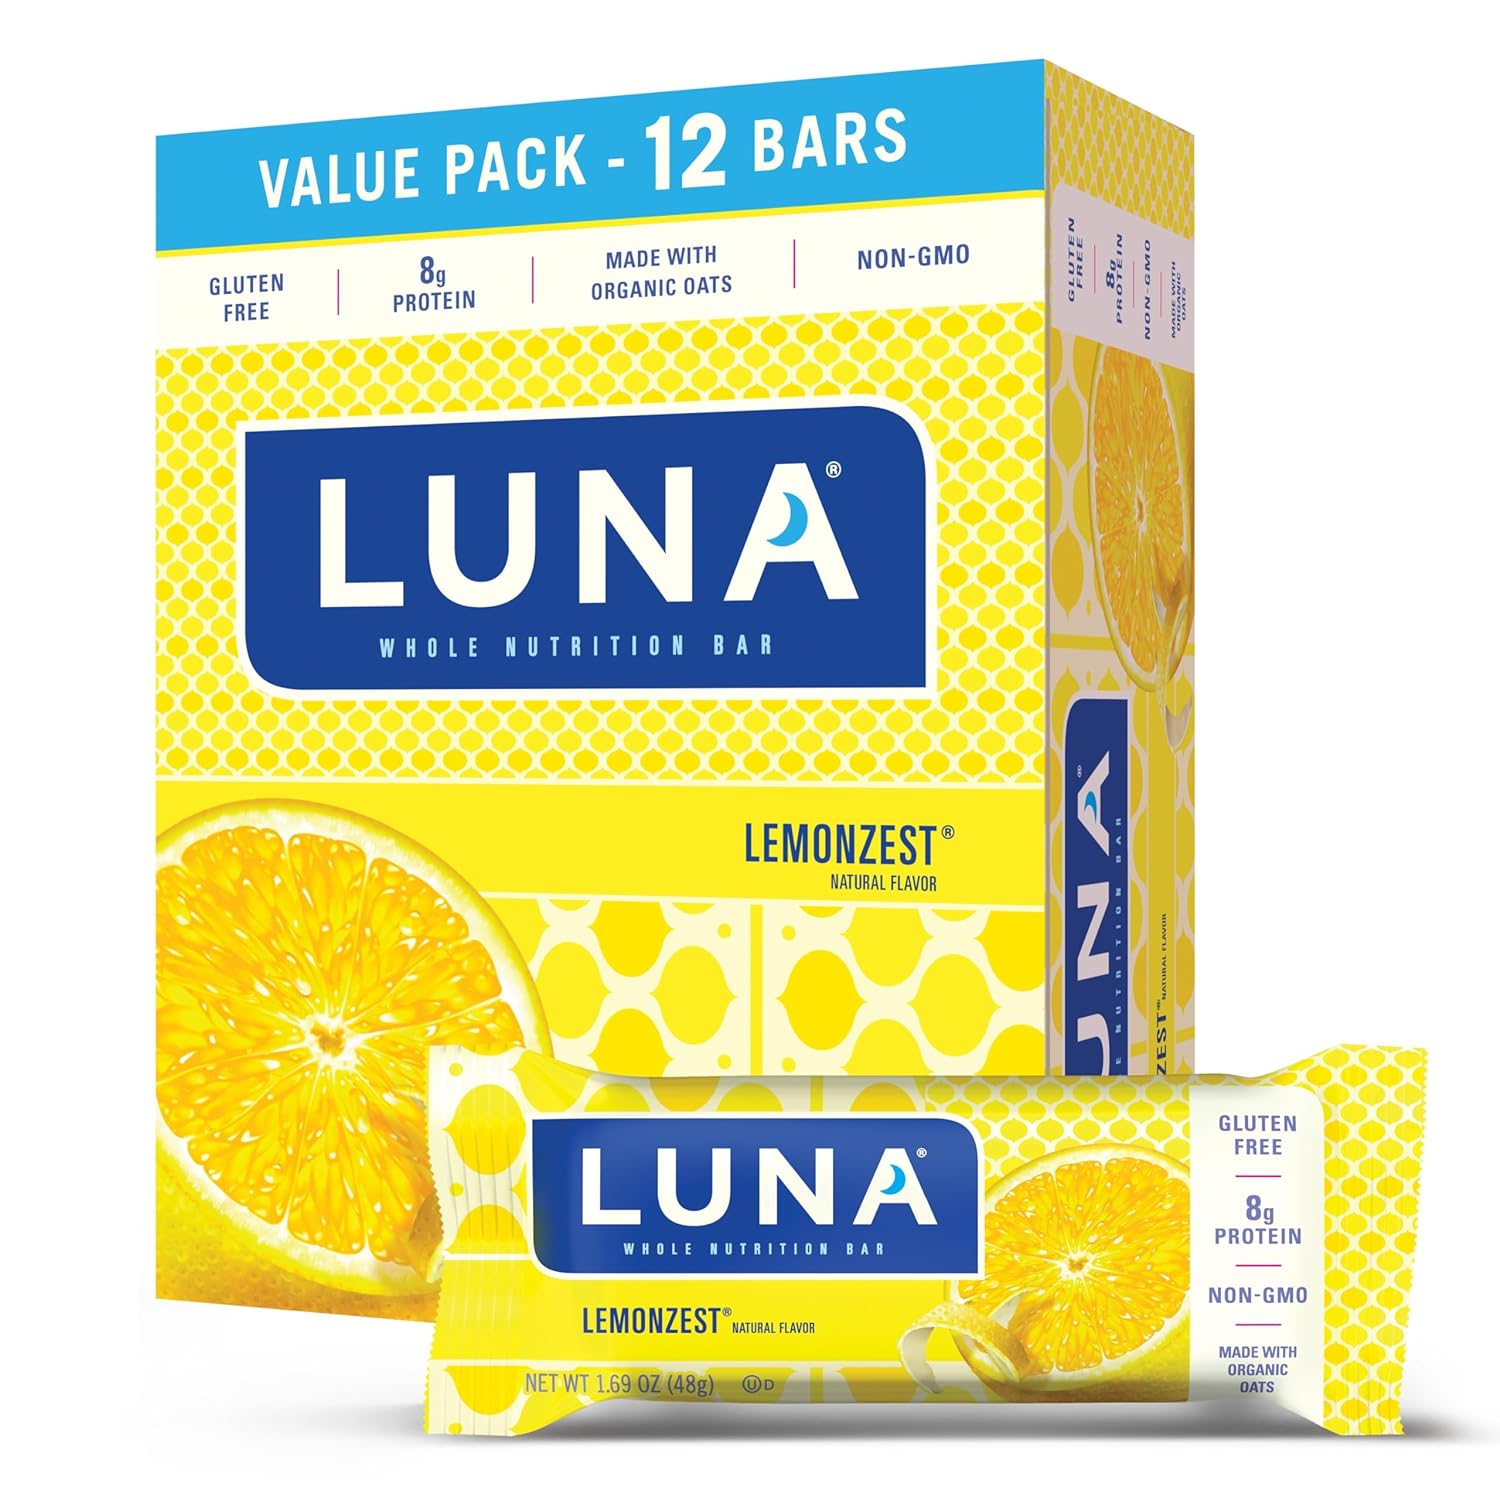 LUNA Bar - LemonZest Flavor - Gluten-Free - Non-GMO - 7-9g Protein - Made with Organic Oats - Low Glycemic - Whole Nutrition Snack Bars - 1.69 oz. (12 Pack)